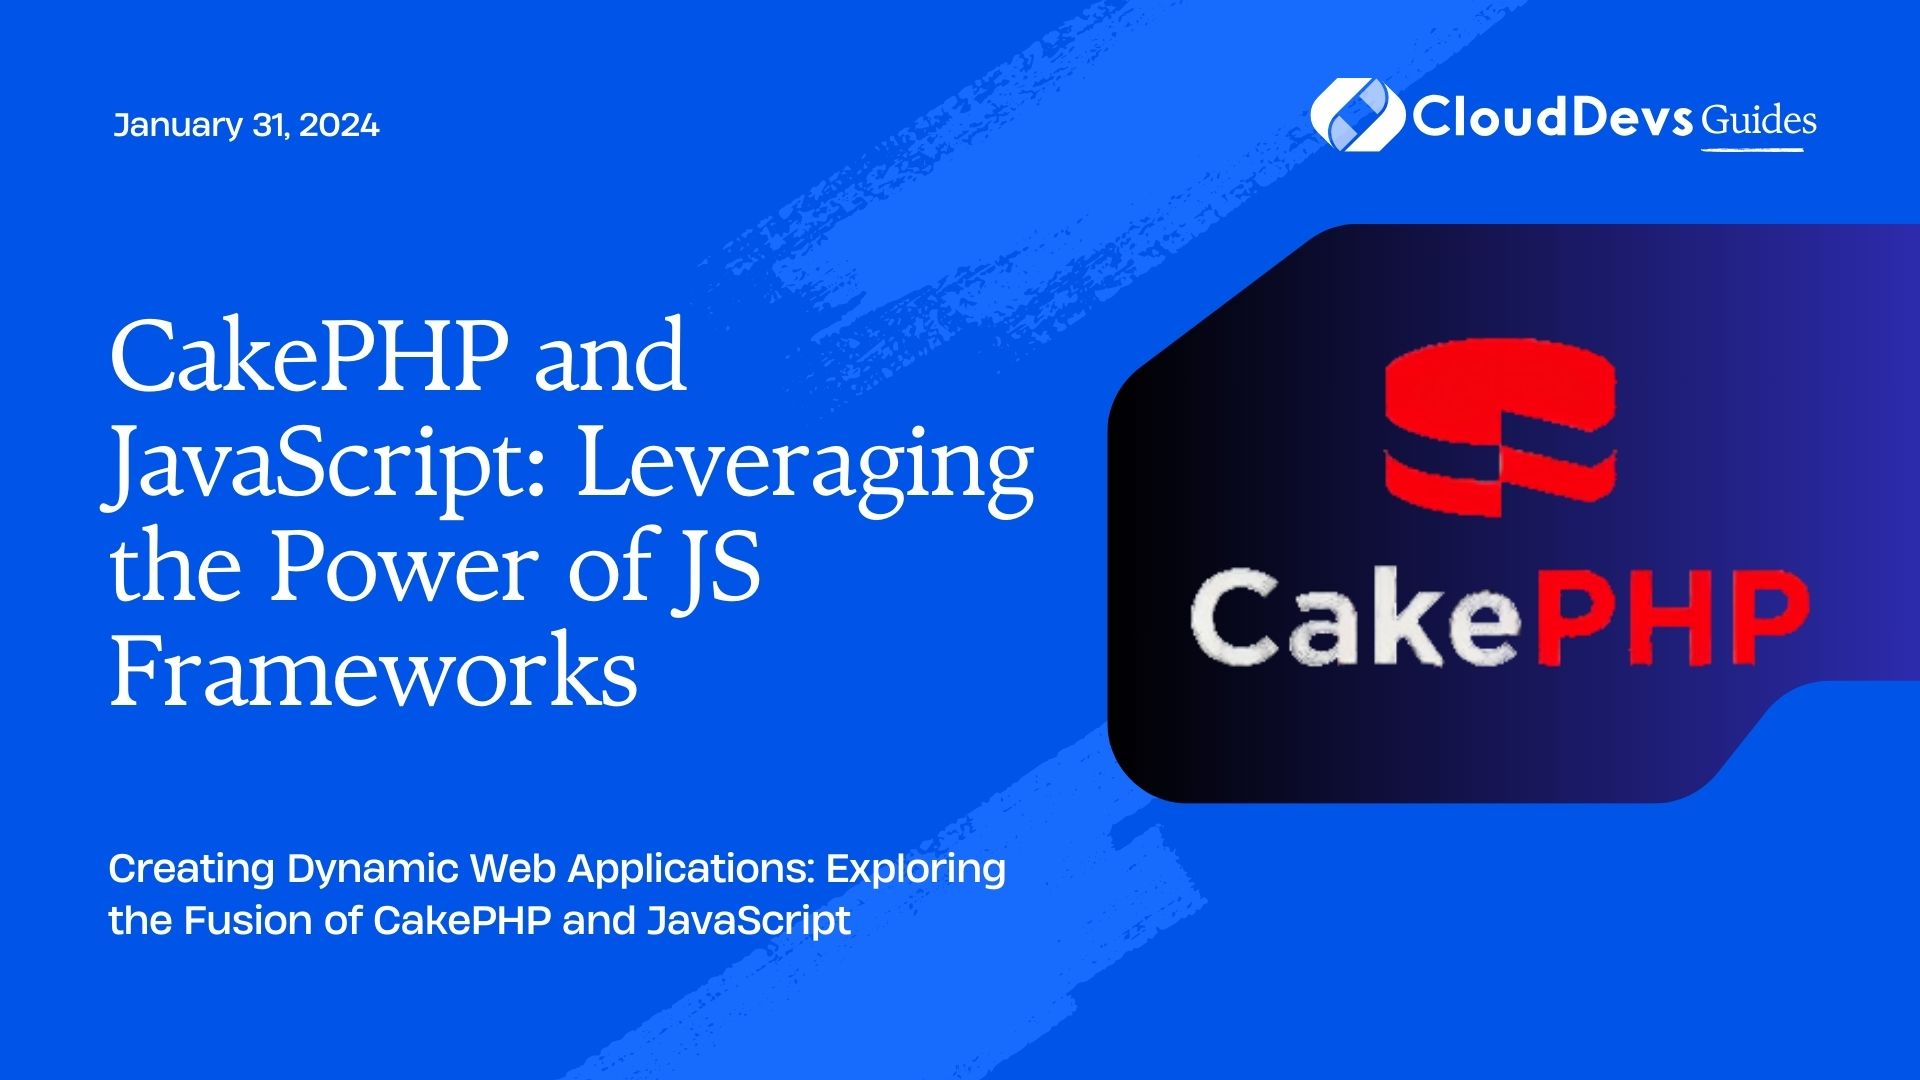 CakePHP and JavaScript: Leveraging the Power of JS Frameworks